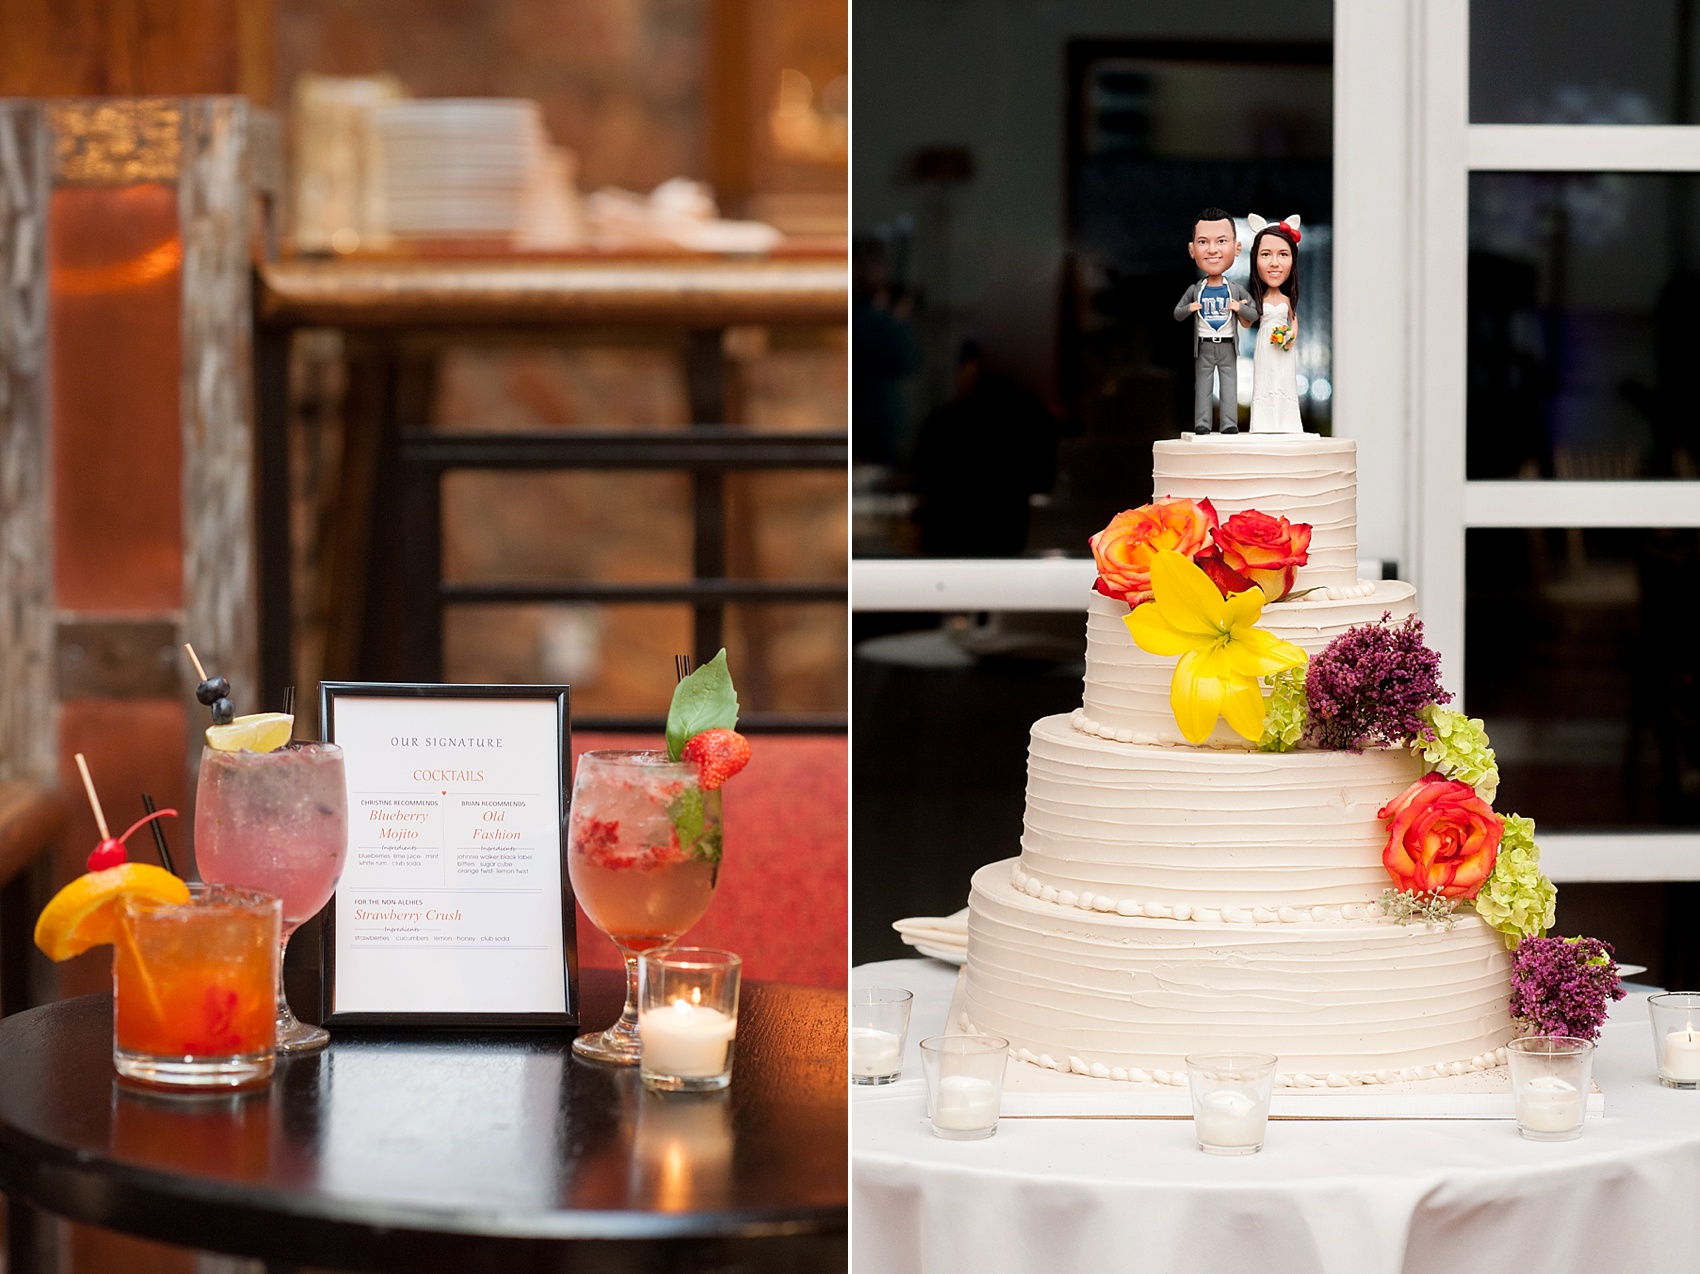 Custom cocktails and tiered white buttercream cake with custom caricature bride and groom figurines from Etsy. Stonehouse at Stirling Ridge fall wedding. Photos by Mikkel Paige Photography, New Jersey wedding photographer.